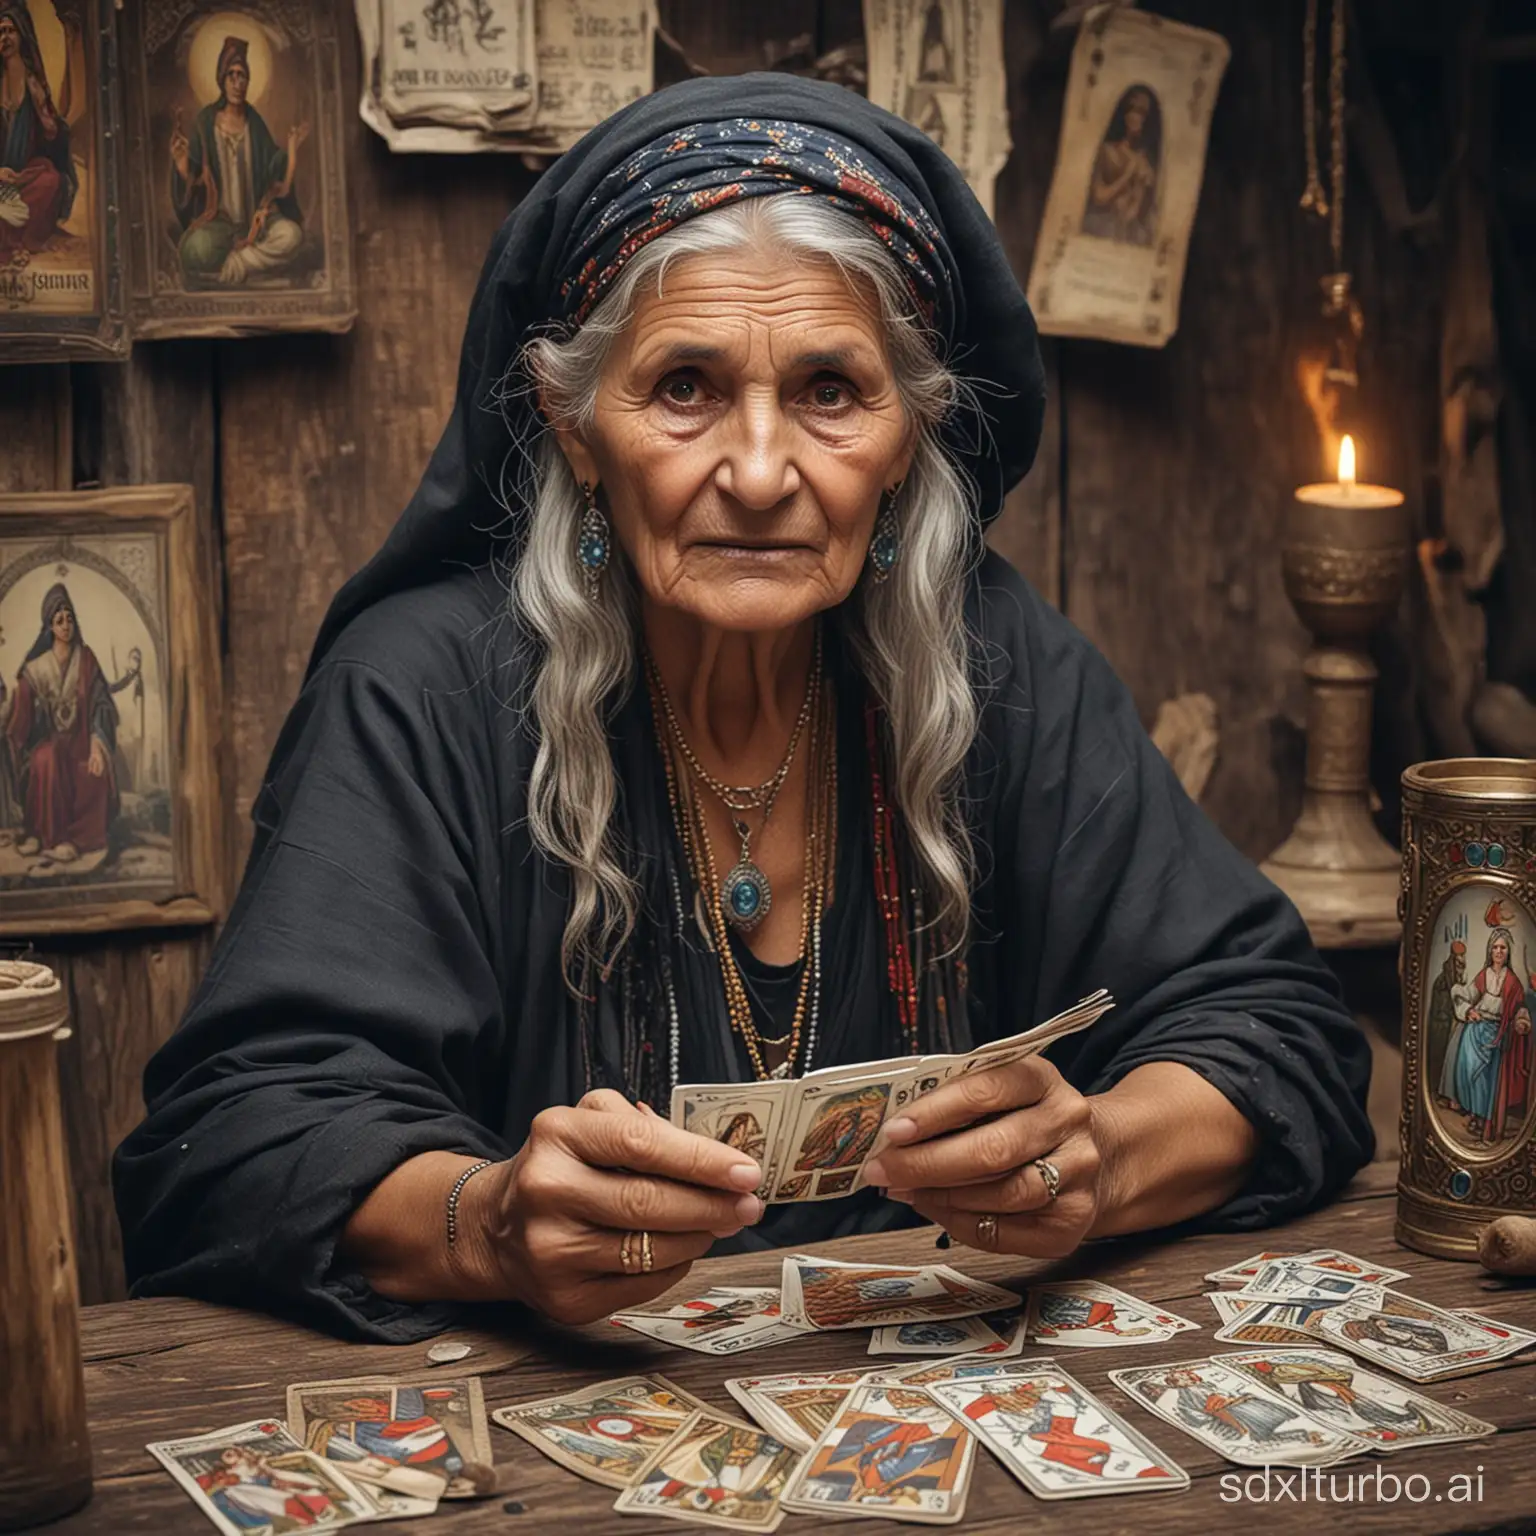 old gypsy woman telling fortune from tarot cards in a poor but mystical environment